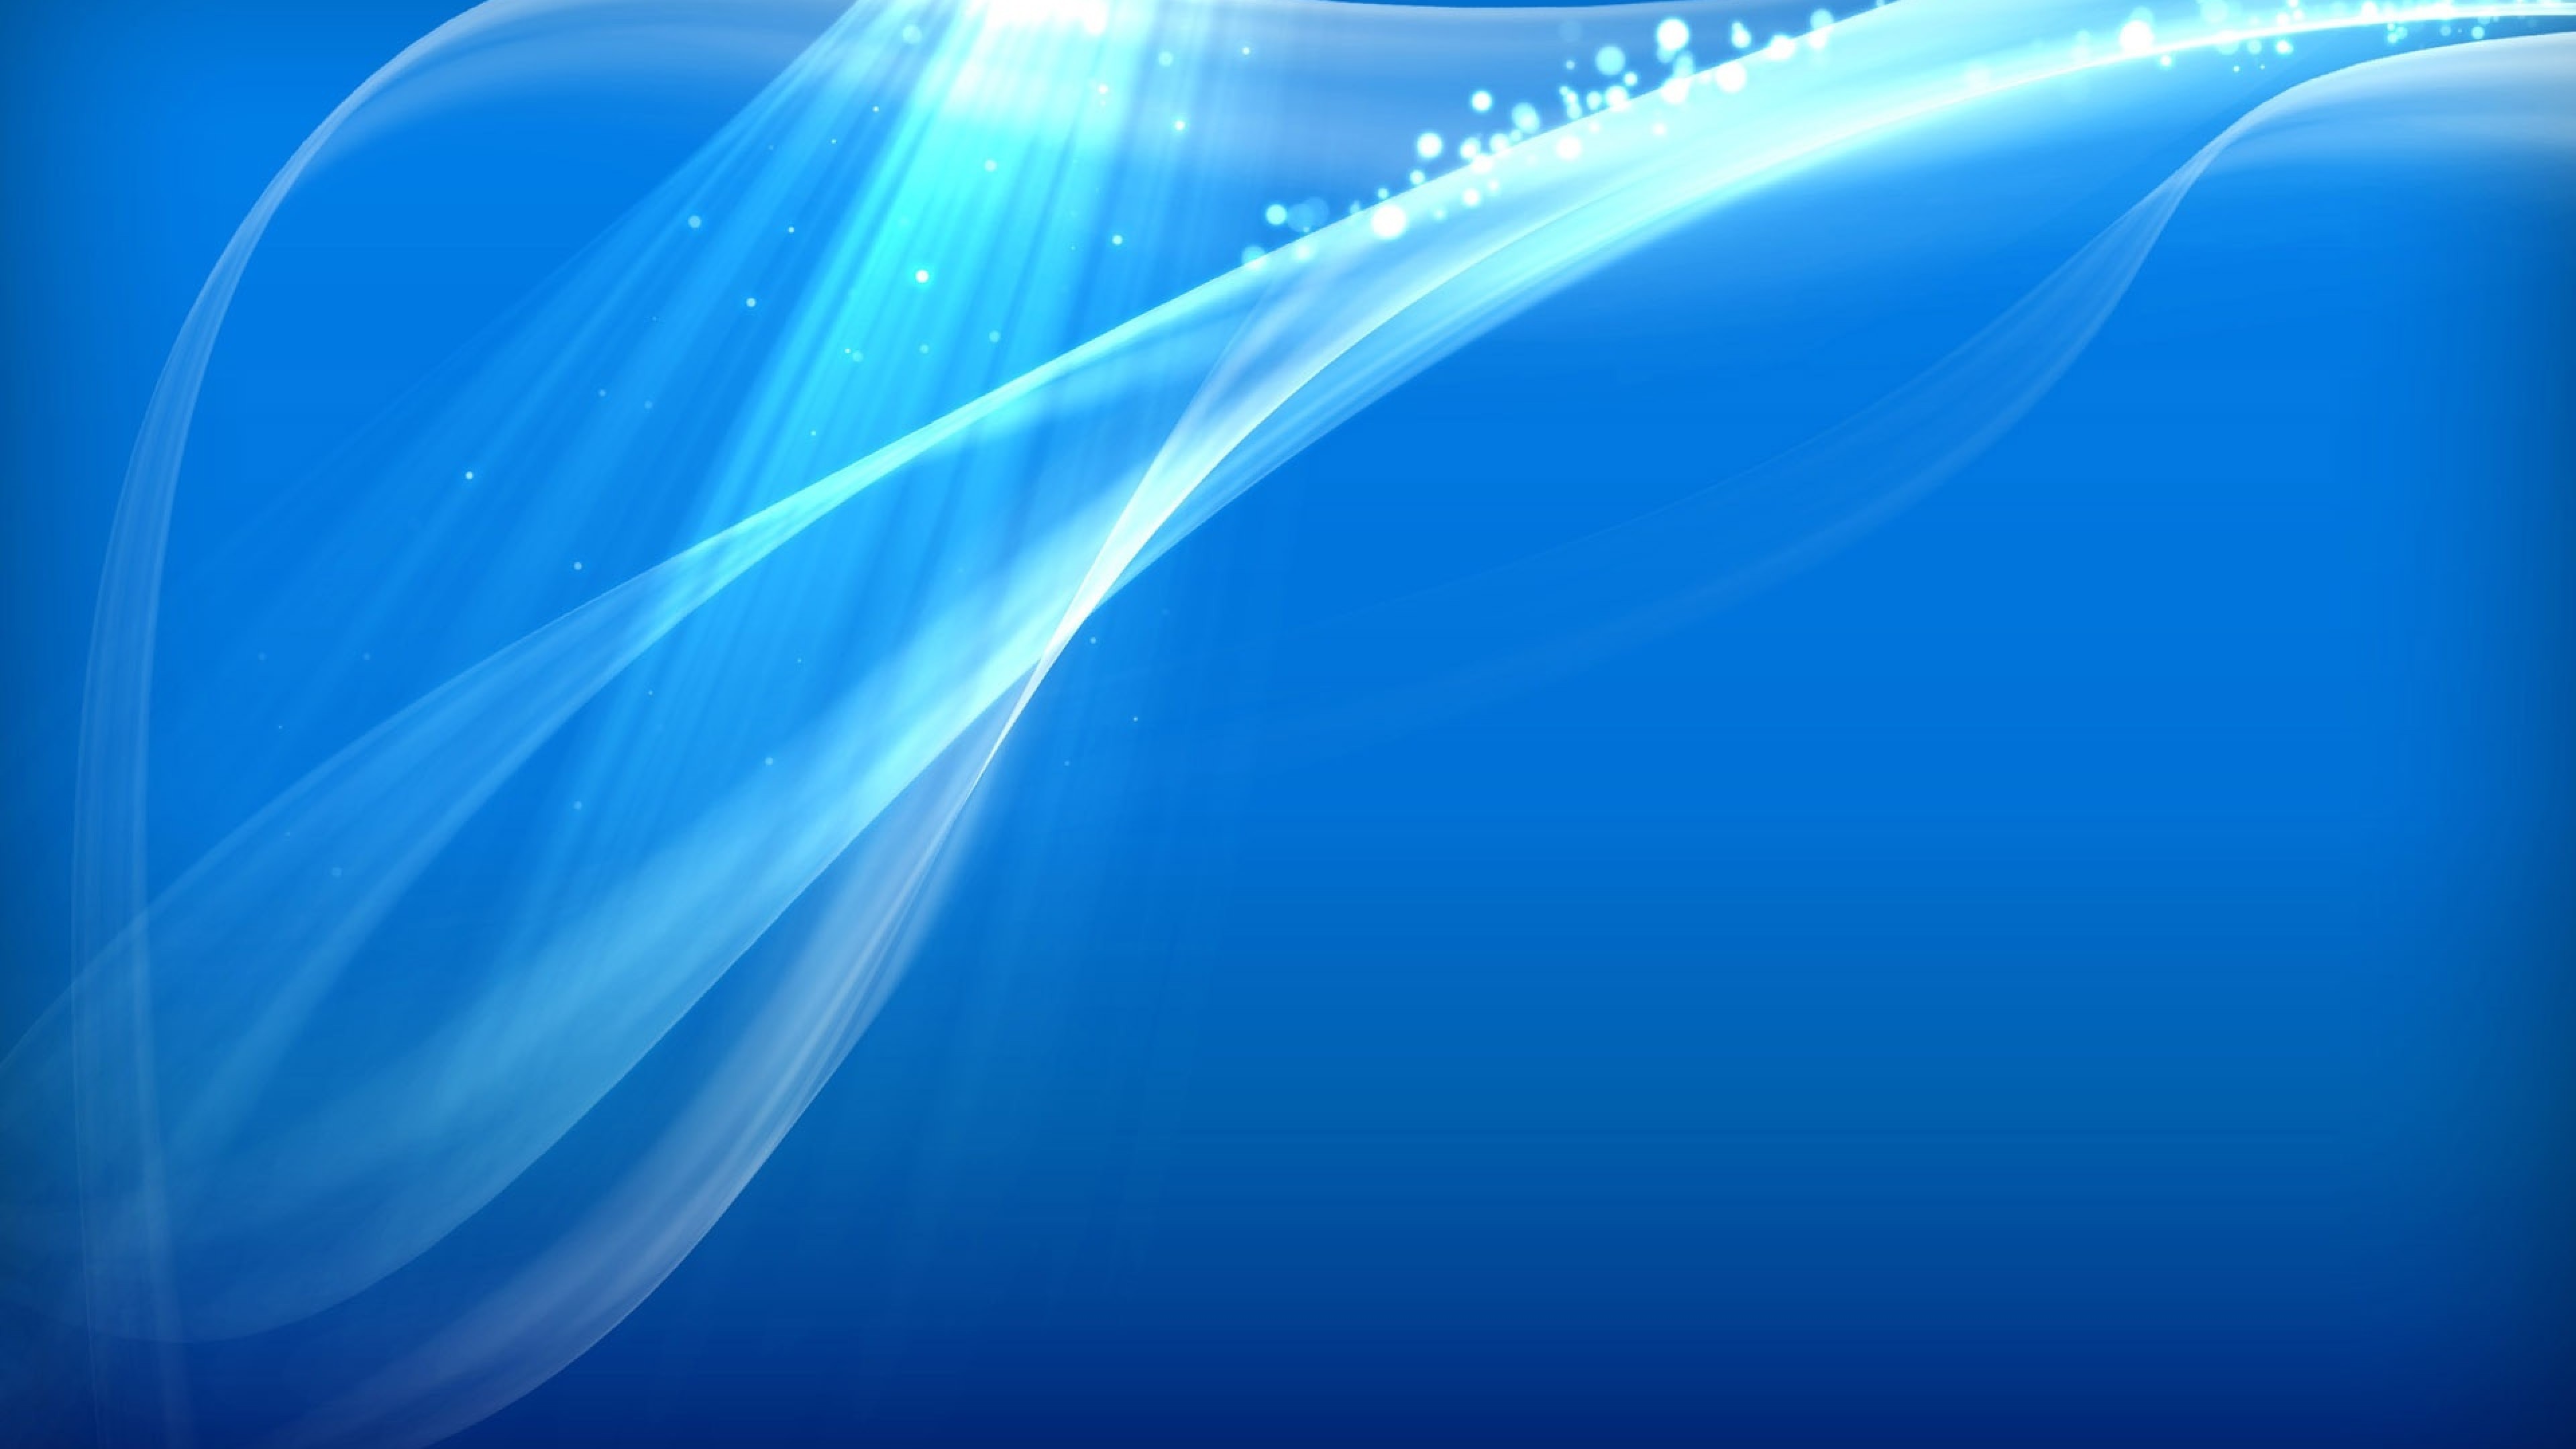 Blue Abstract Background Hd Wallpaper for Deskstop and Mobiles 4K Ultra HD  - HD Wallpaper 